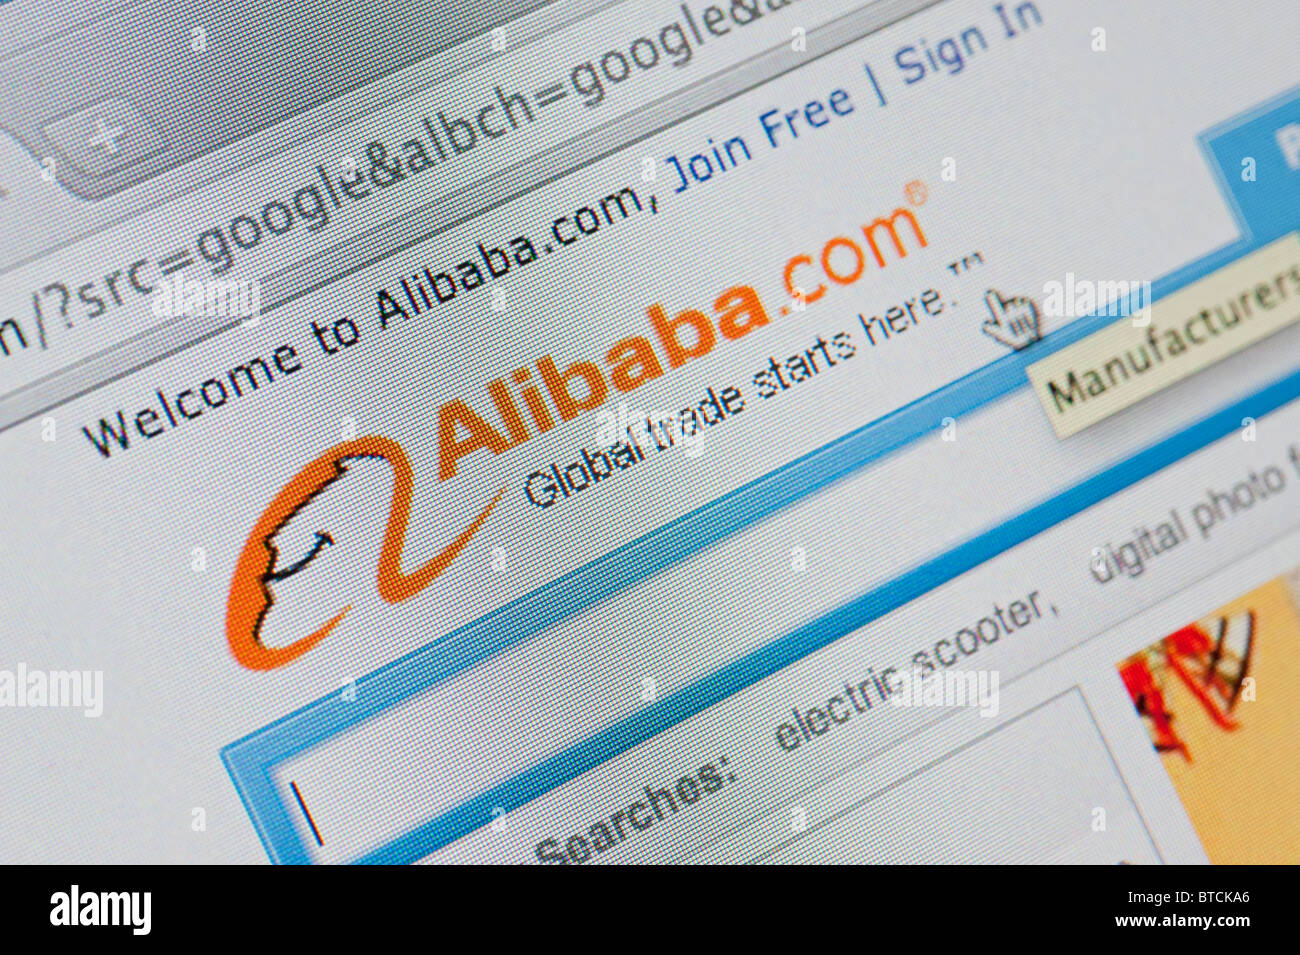 Detail of screenshot from website of Chinese Alibaba online business portal Stock Photo